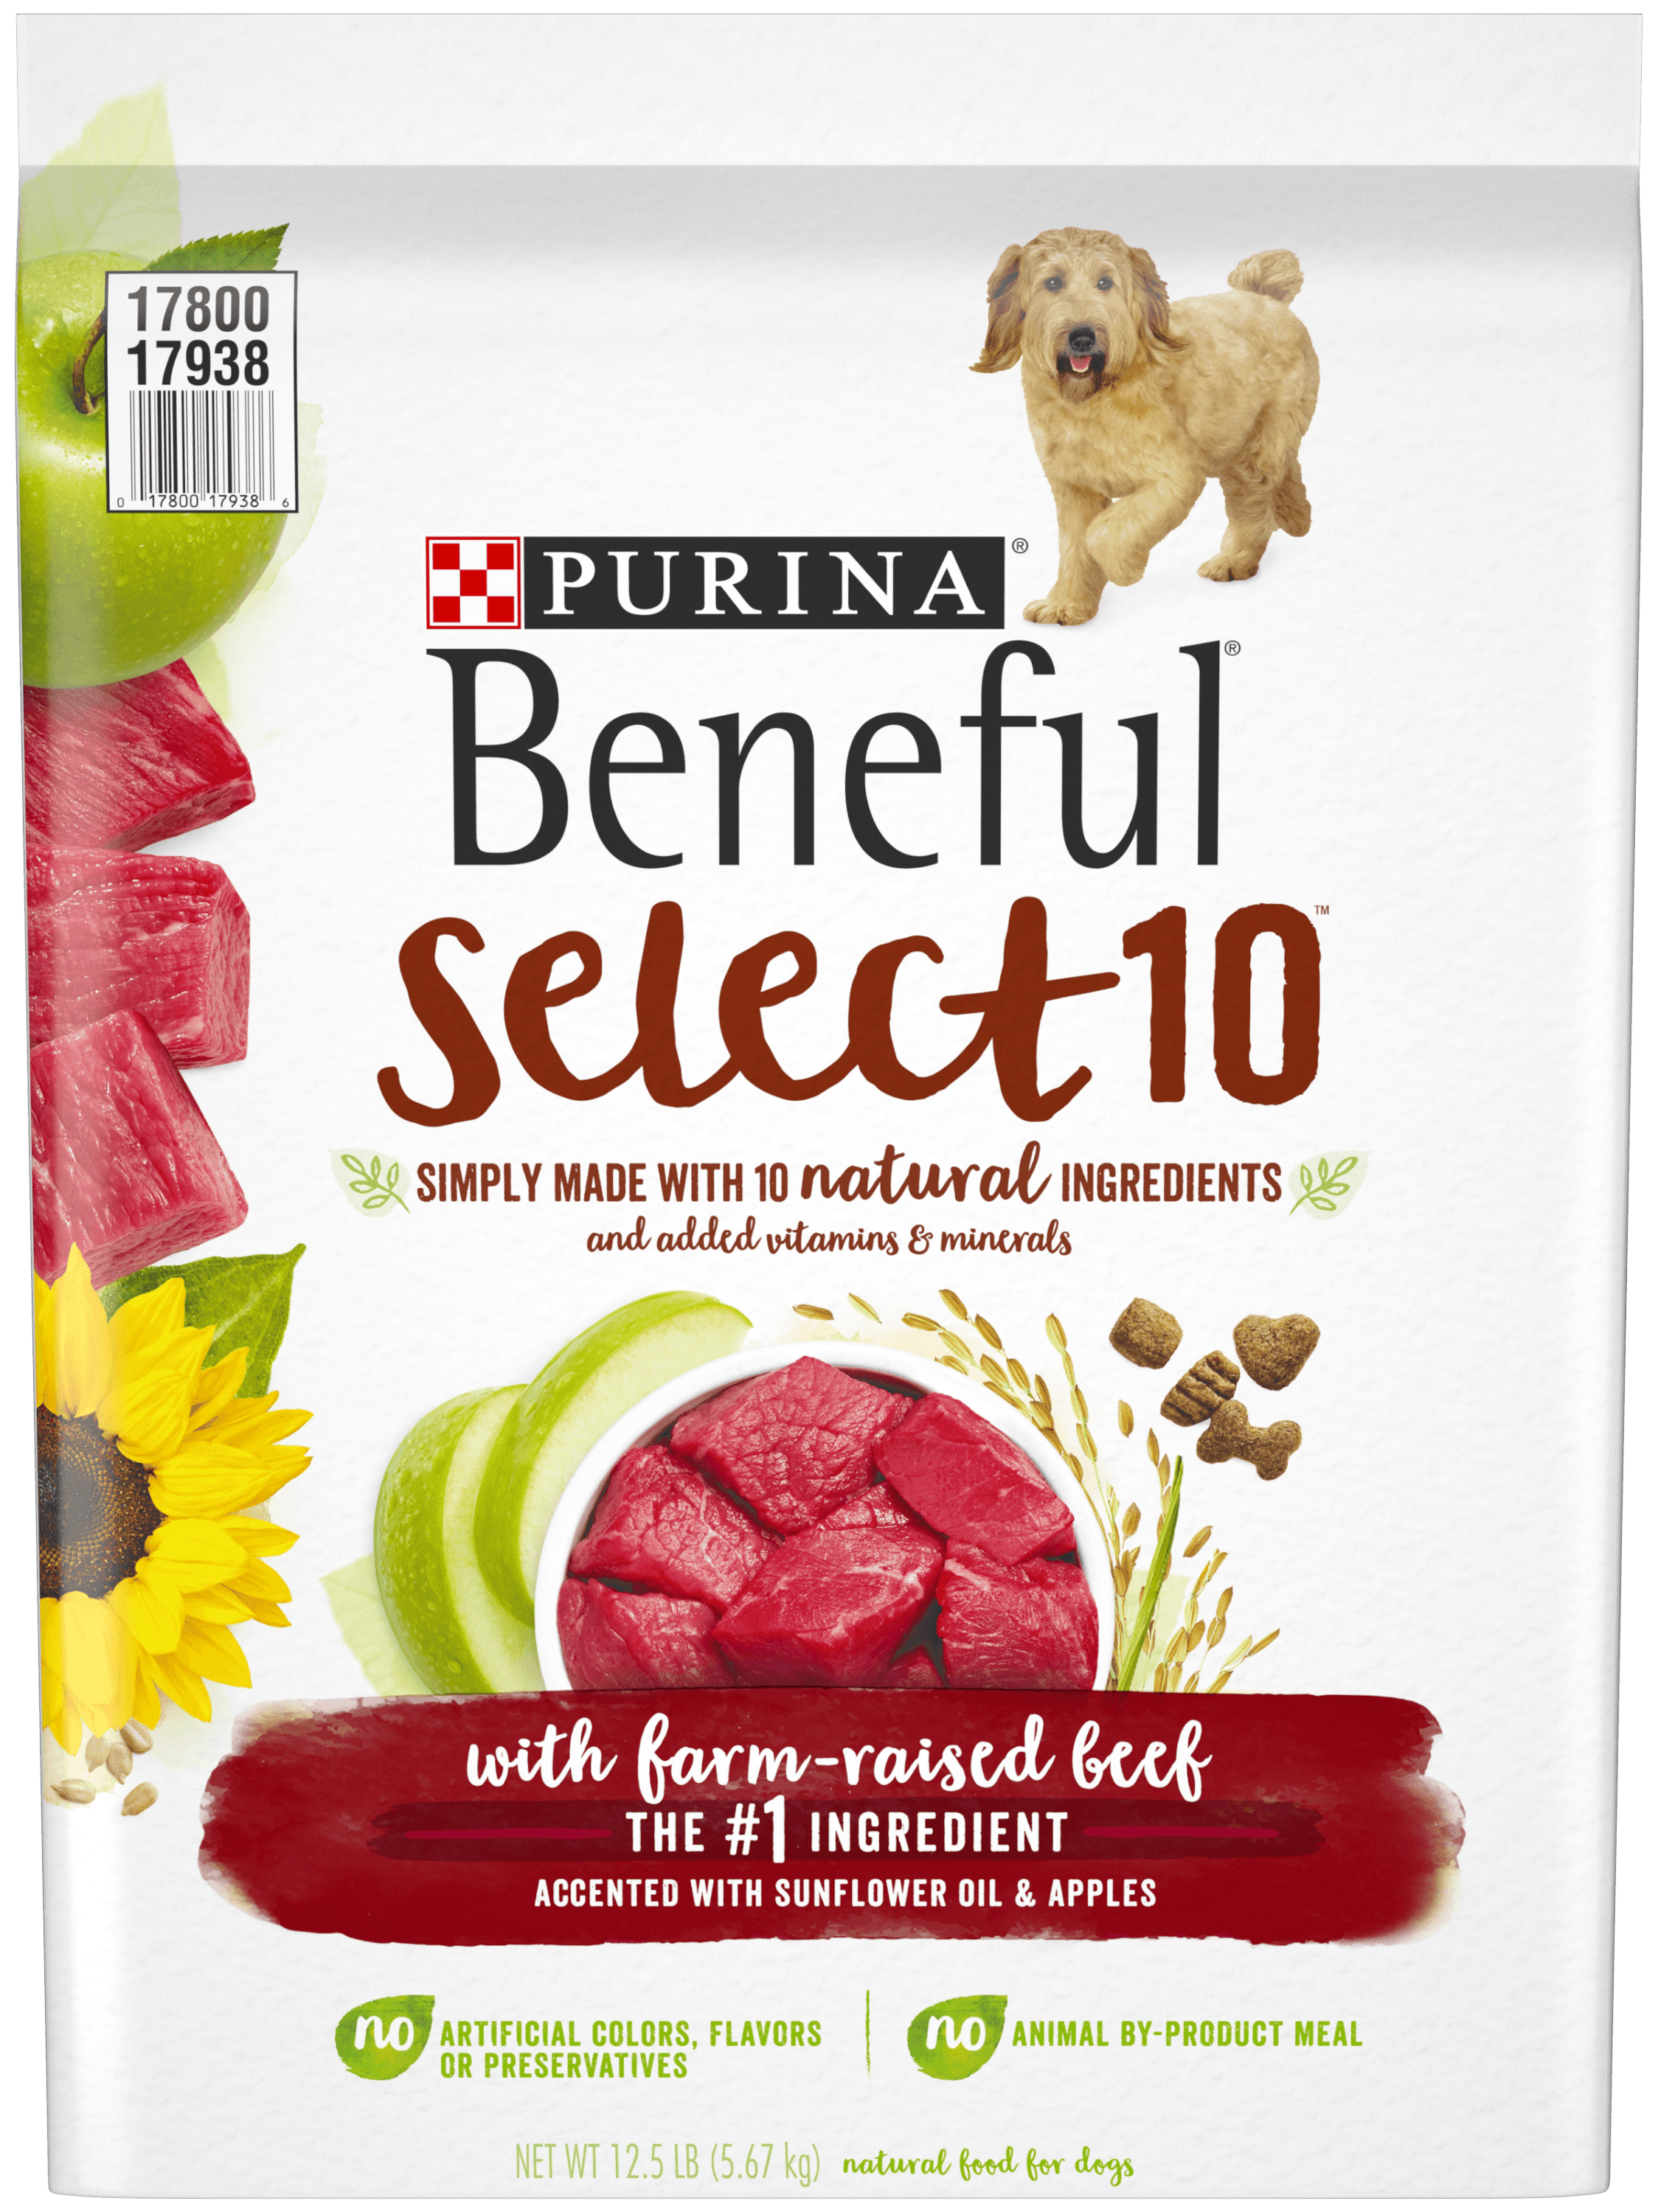 Purina Beneful Natural Dry Dog Food Select 10 With Farm